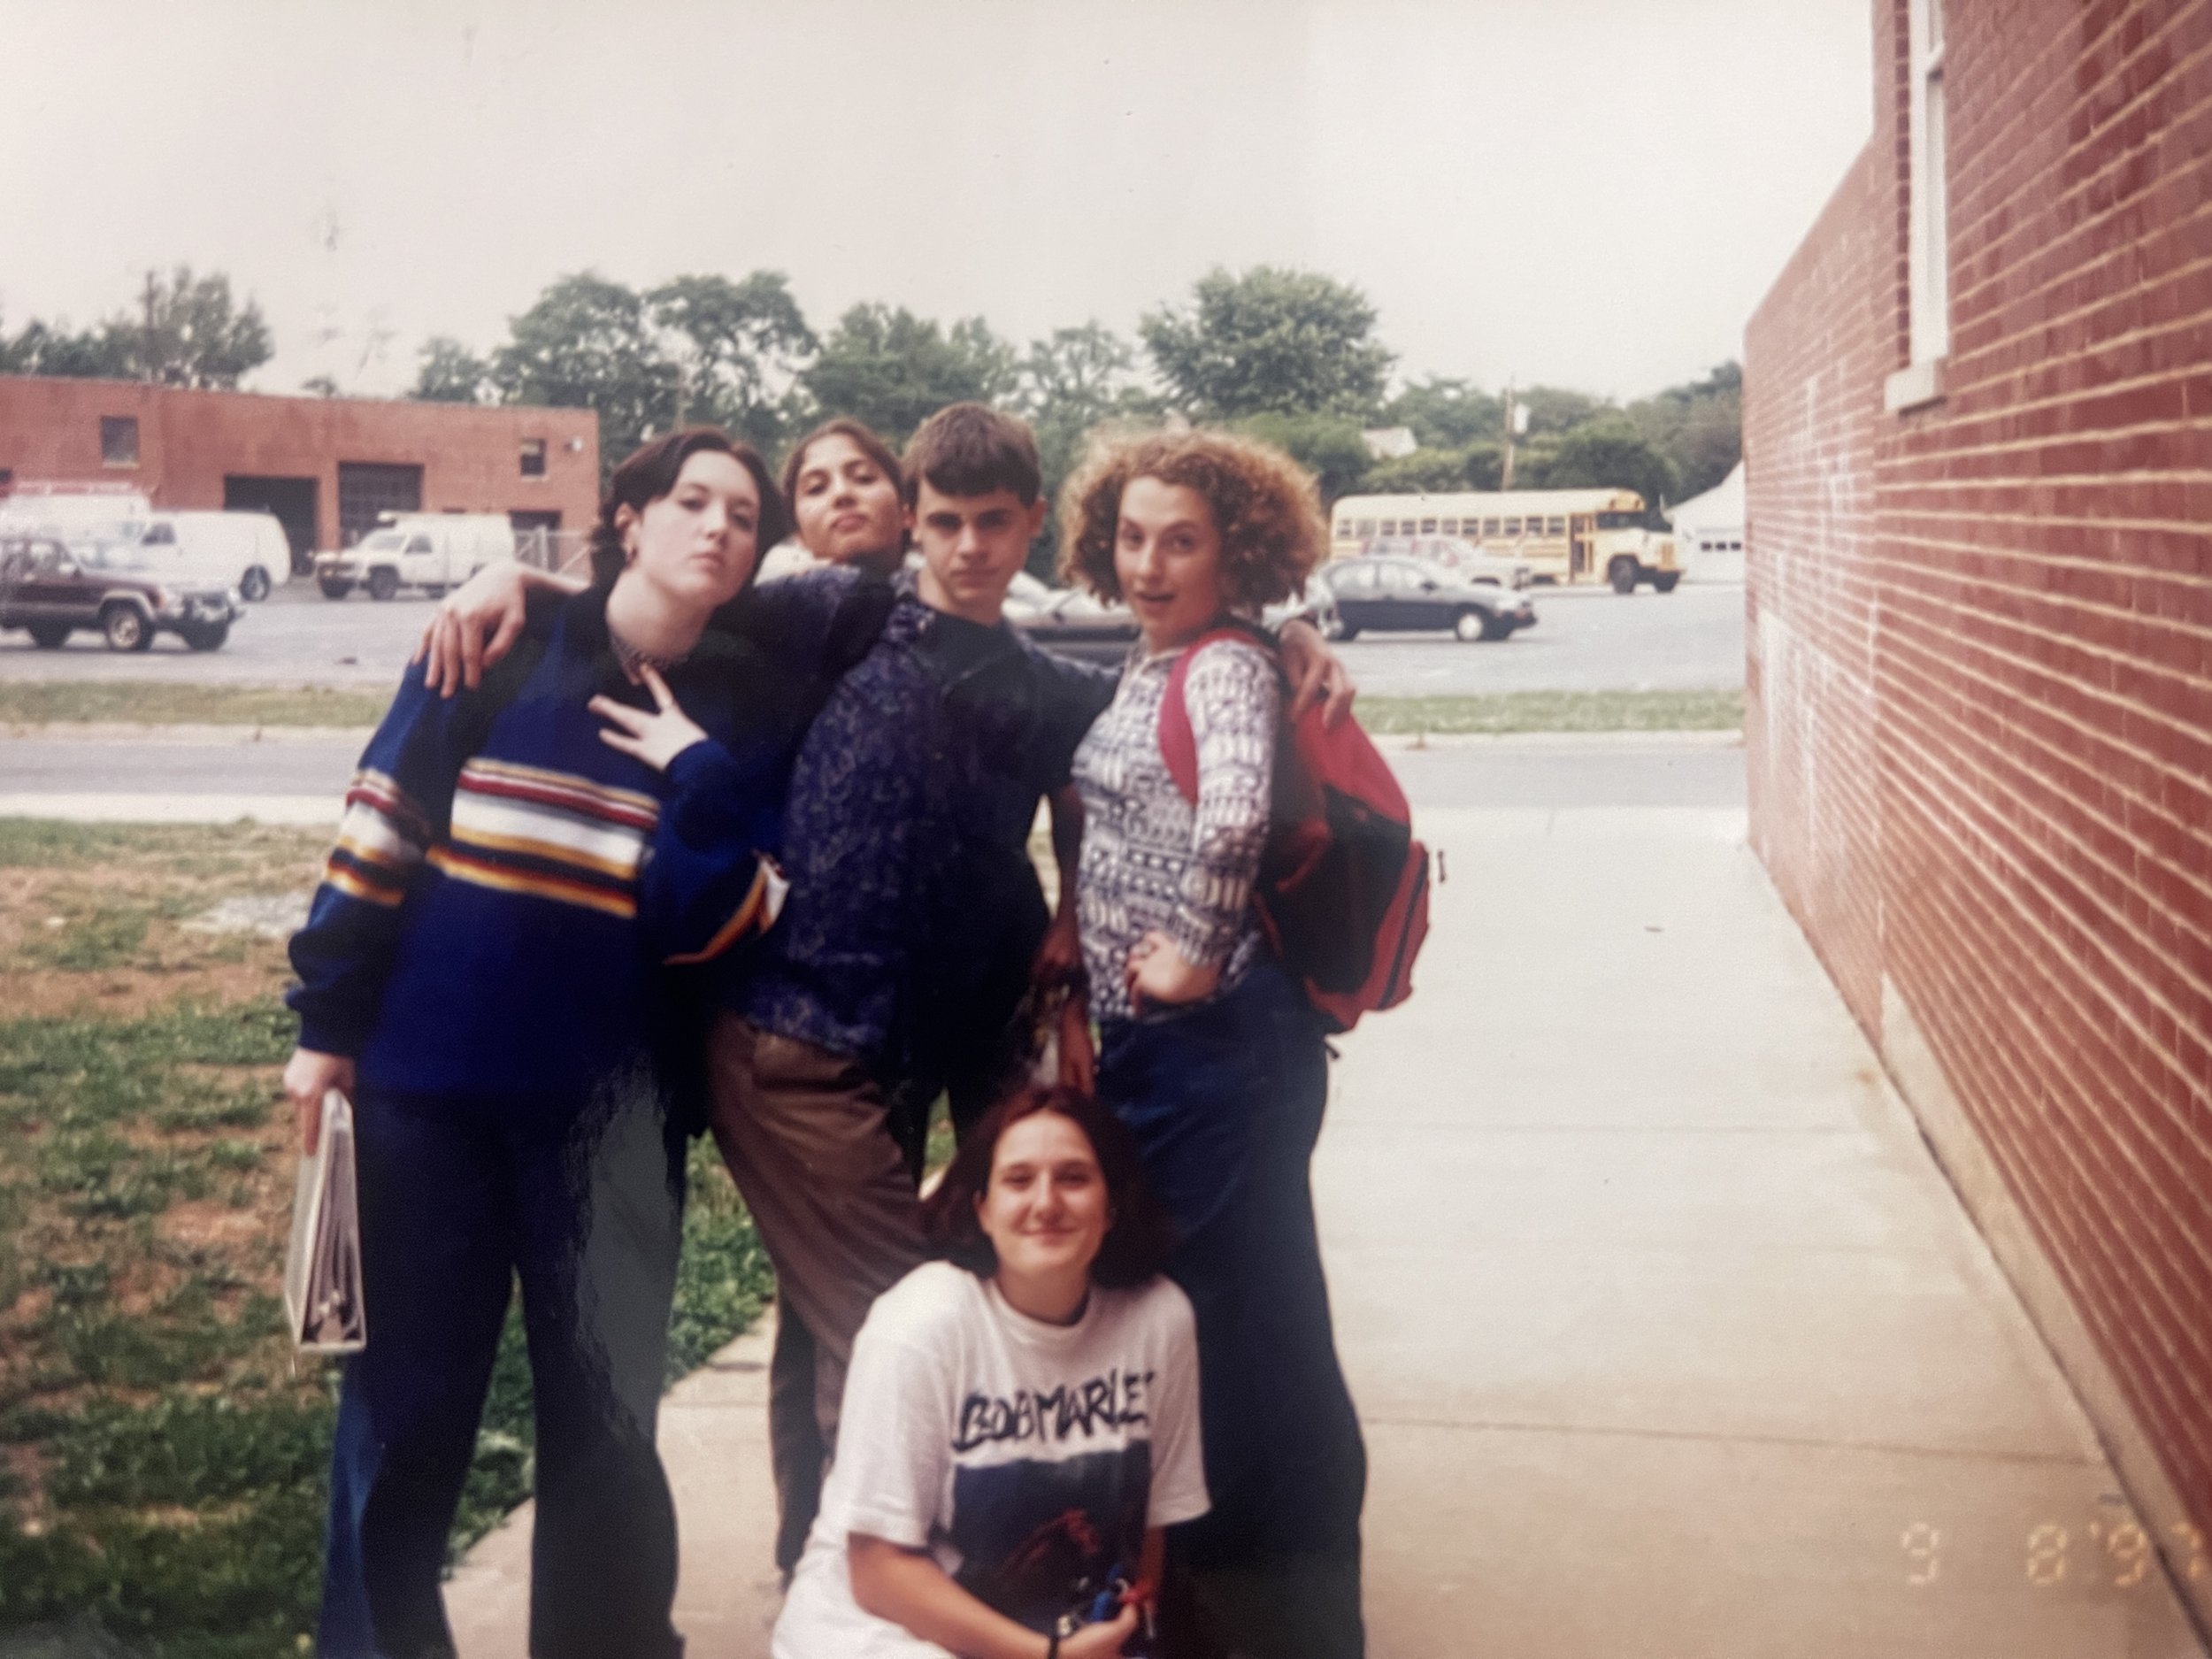 Steve, Kona, and friends at Loudoun County High School in 1997